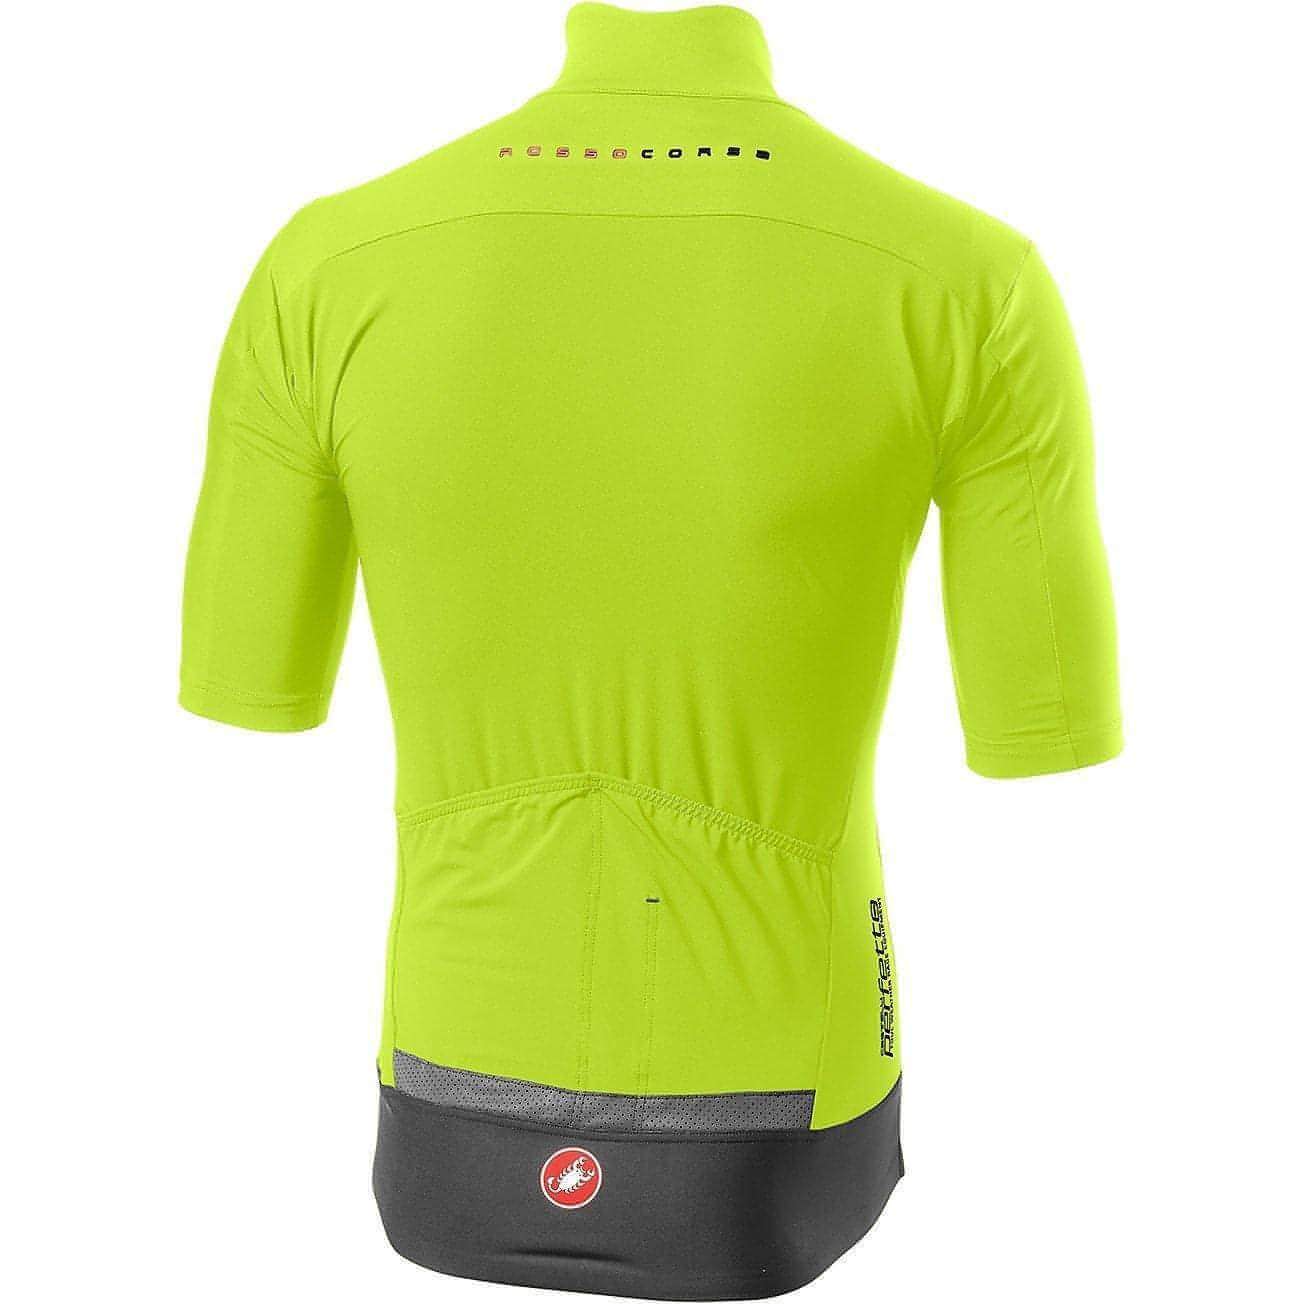 Castelli Perfetto RoS Light Short Sleeve Mens Cycling Jersey - Yellow - Start Fitness